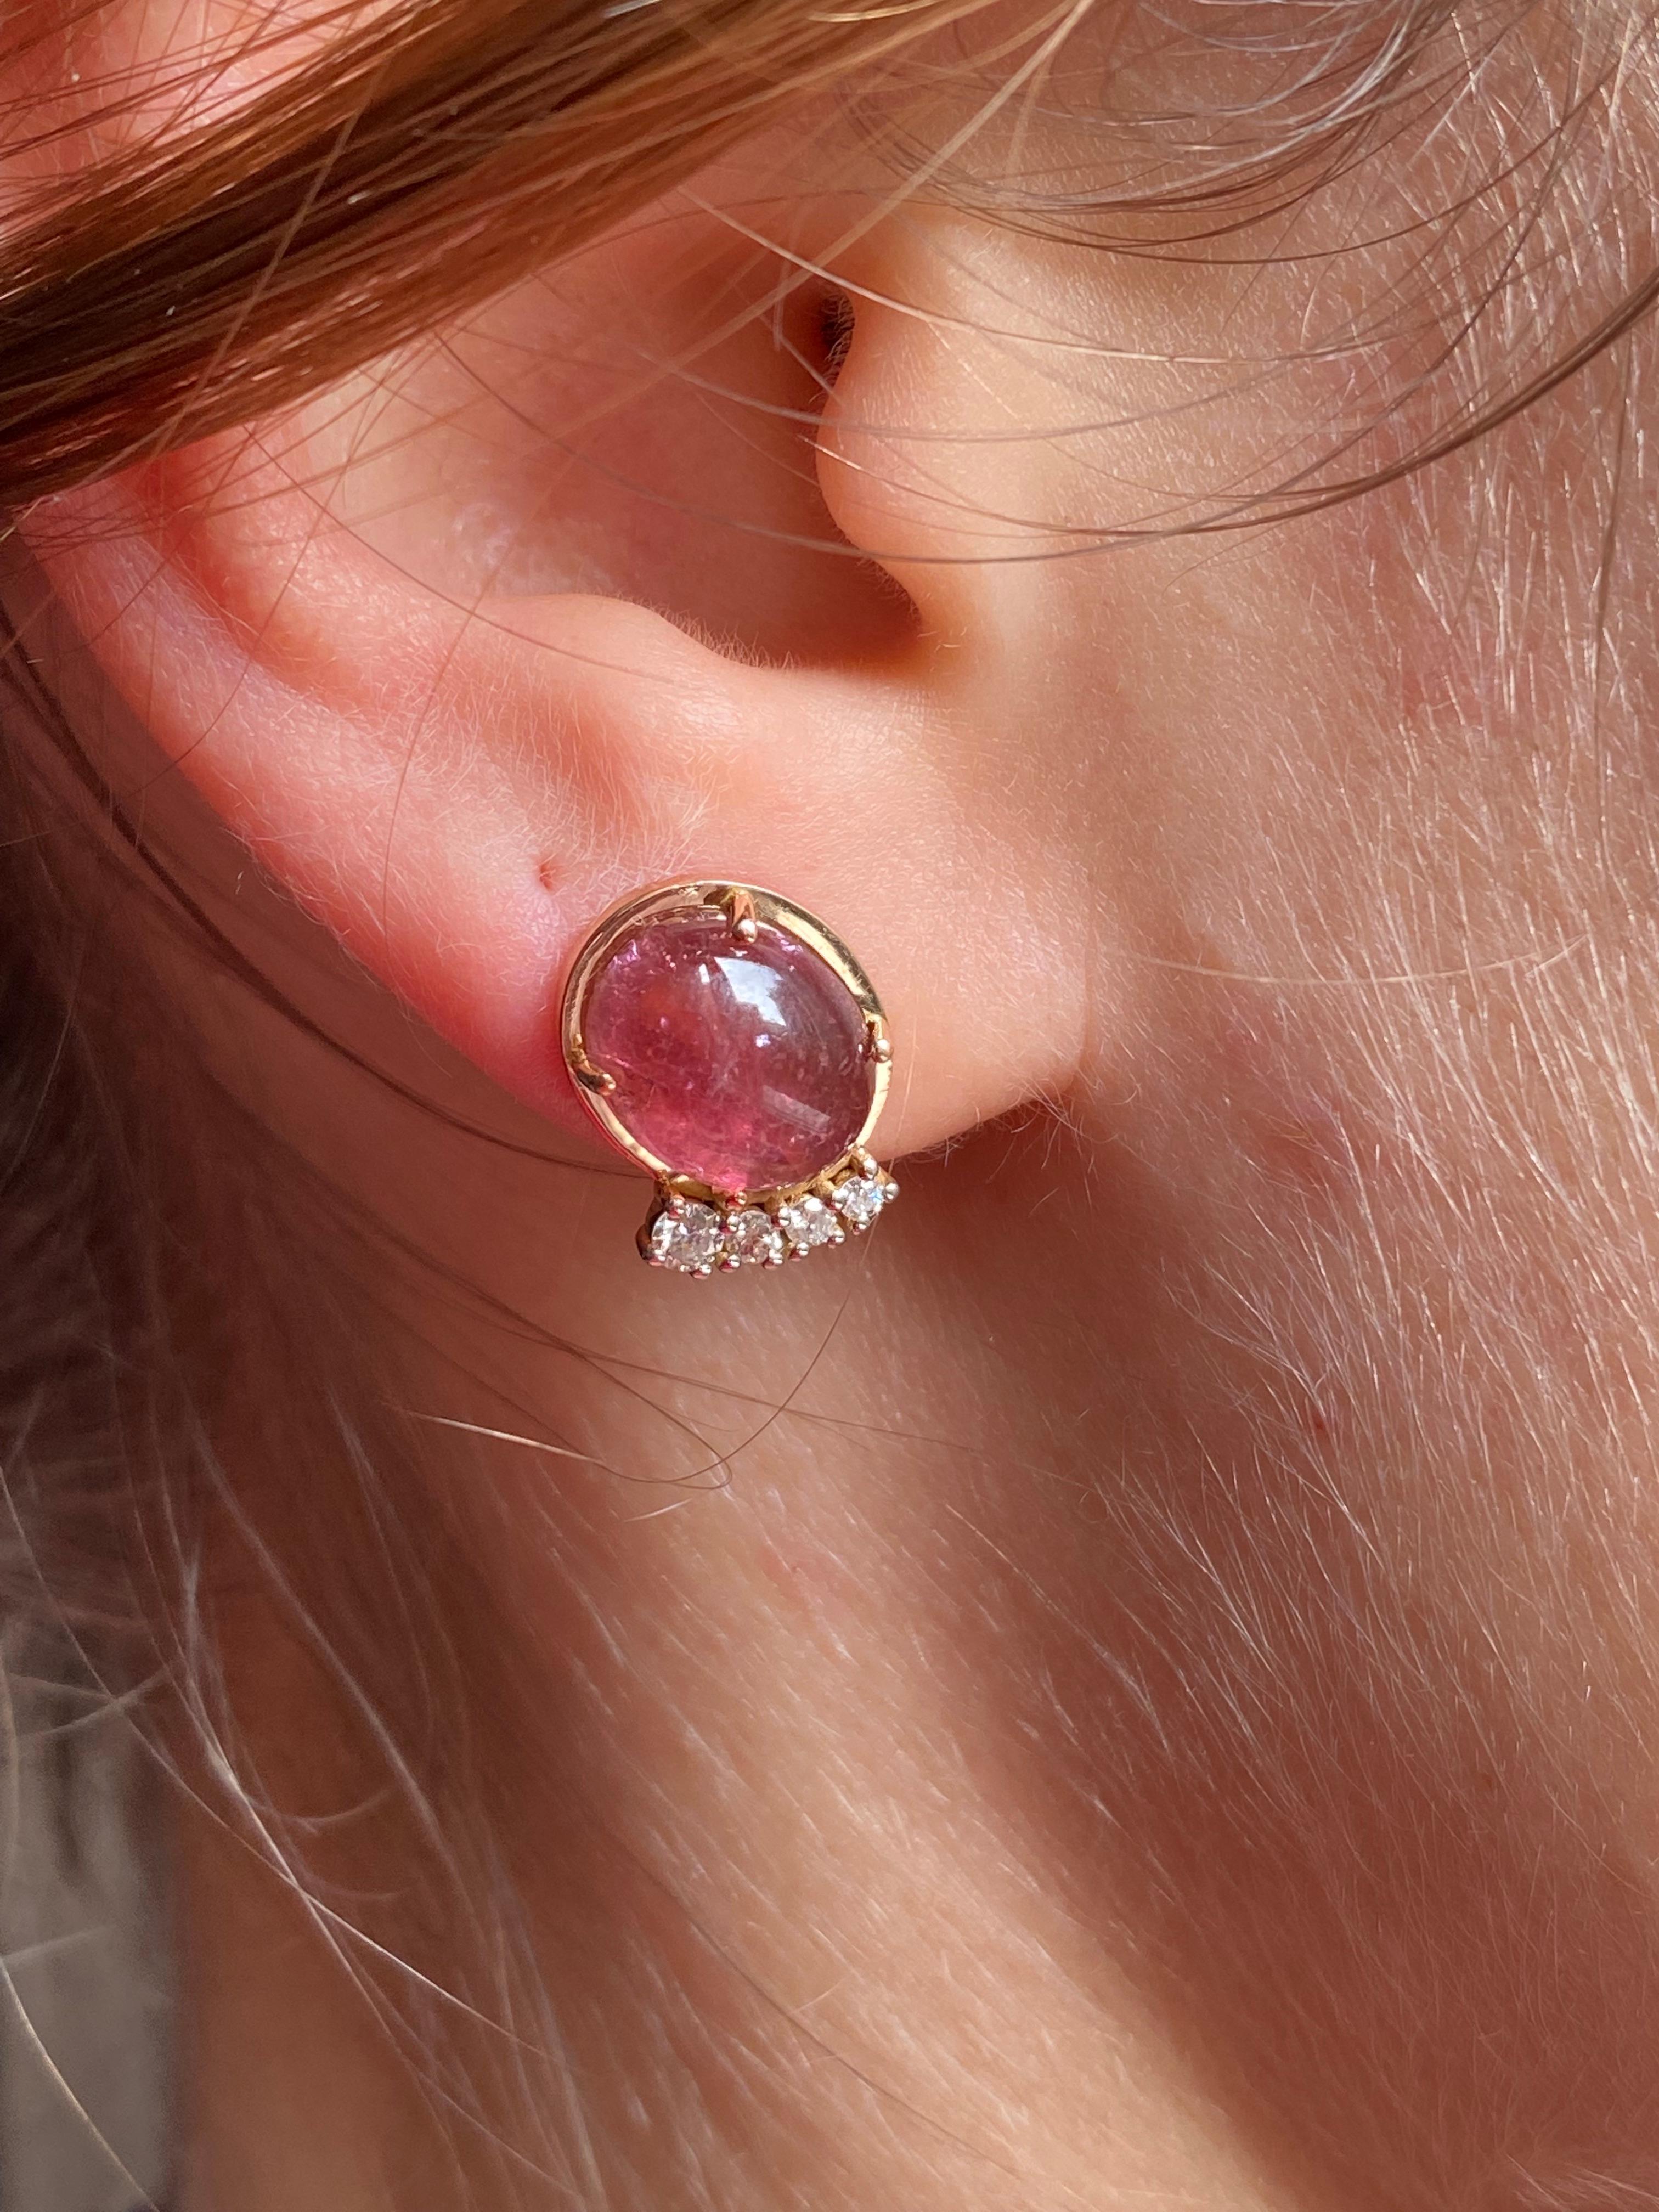 Rossella Ugolini Design Collection Stunning 18 Karat Rose Gold 0.22 Carats White Diamonds and aprox . 6 Carats Rubelite Stud Design Earring Handcrafted in Italy . 
The central stone is made of a Rubelite Oval Cabochon cut, a precious stone with